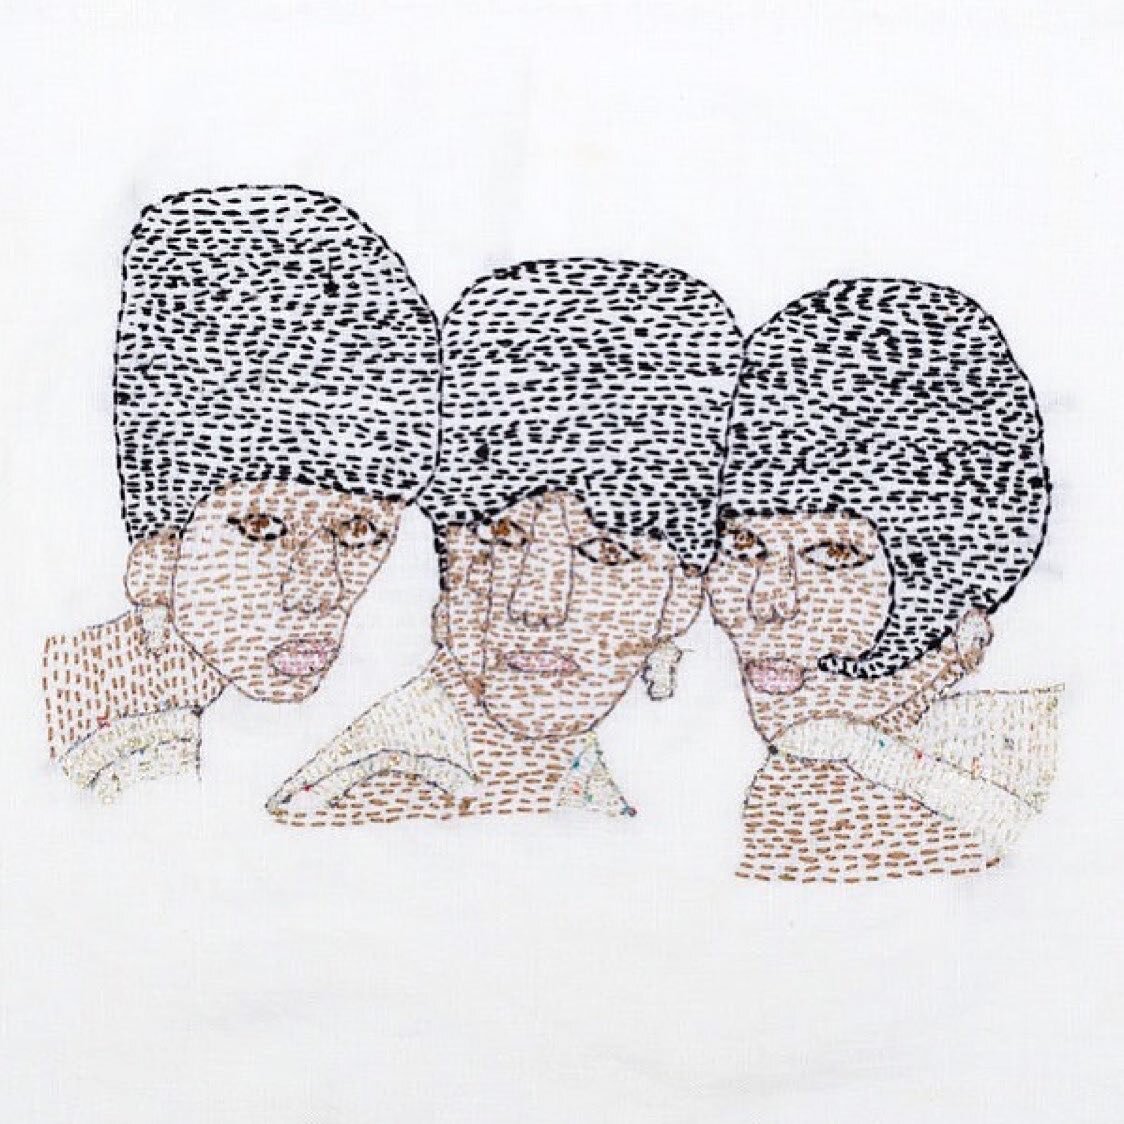 There are so many things I love about this! Embroidery, The Supremes, and an online artist talk (details below) with some incredible people! Zina Hall is an artist who has been part of Creative Growth @creativegrowth since 2006. 

ARTIST TALK WITH ZI